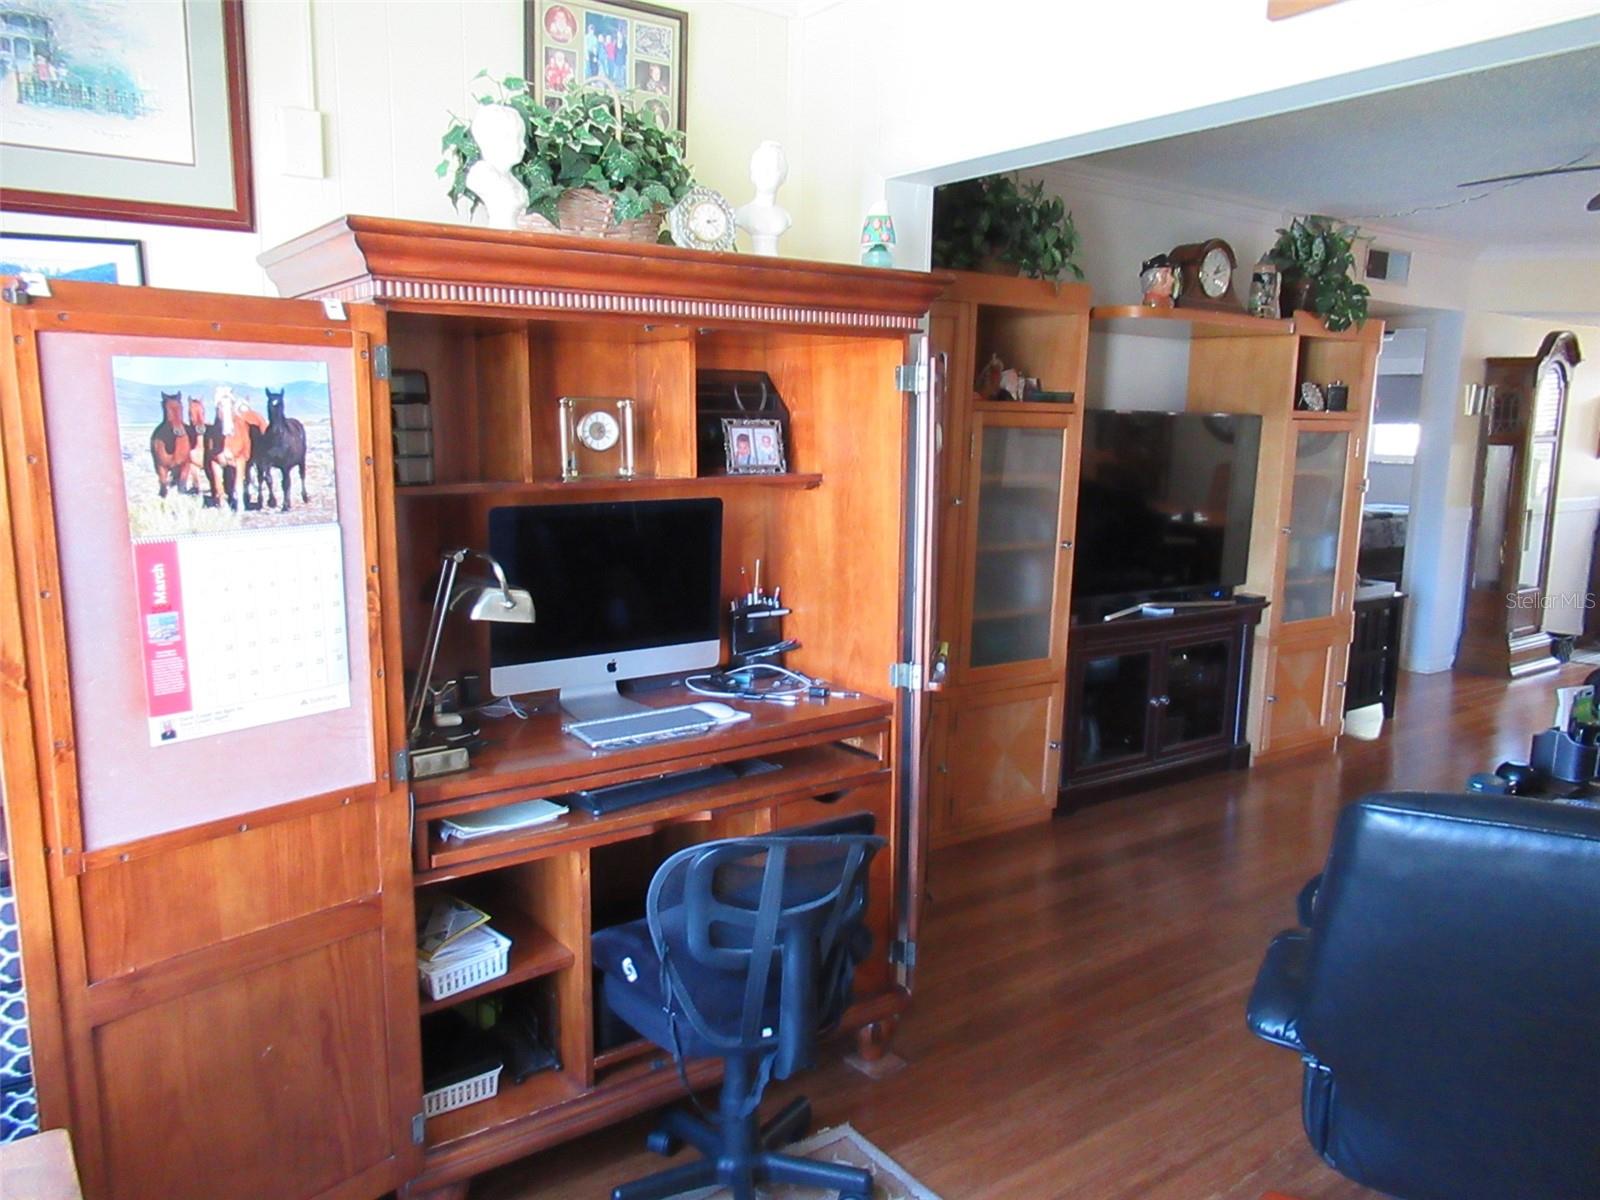 Office to Living Room